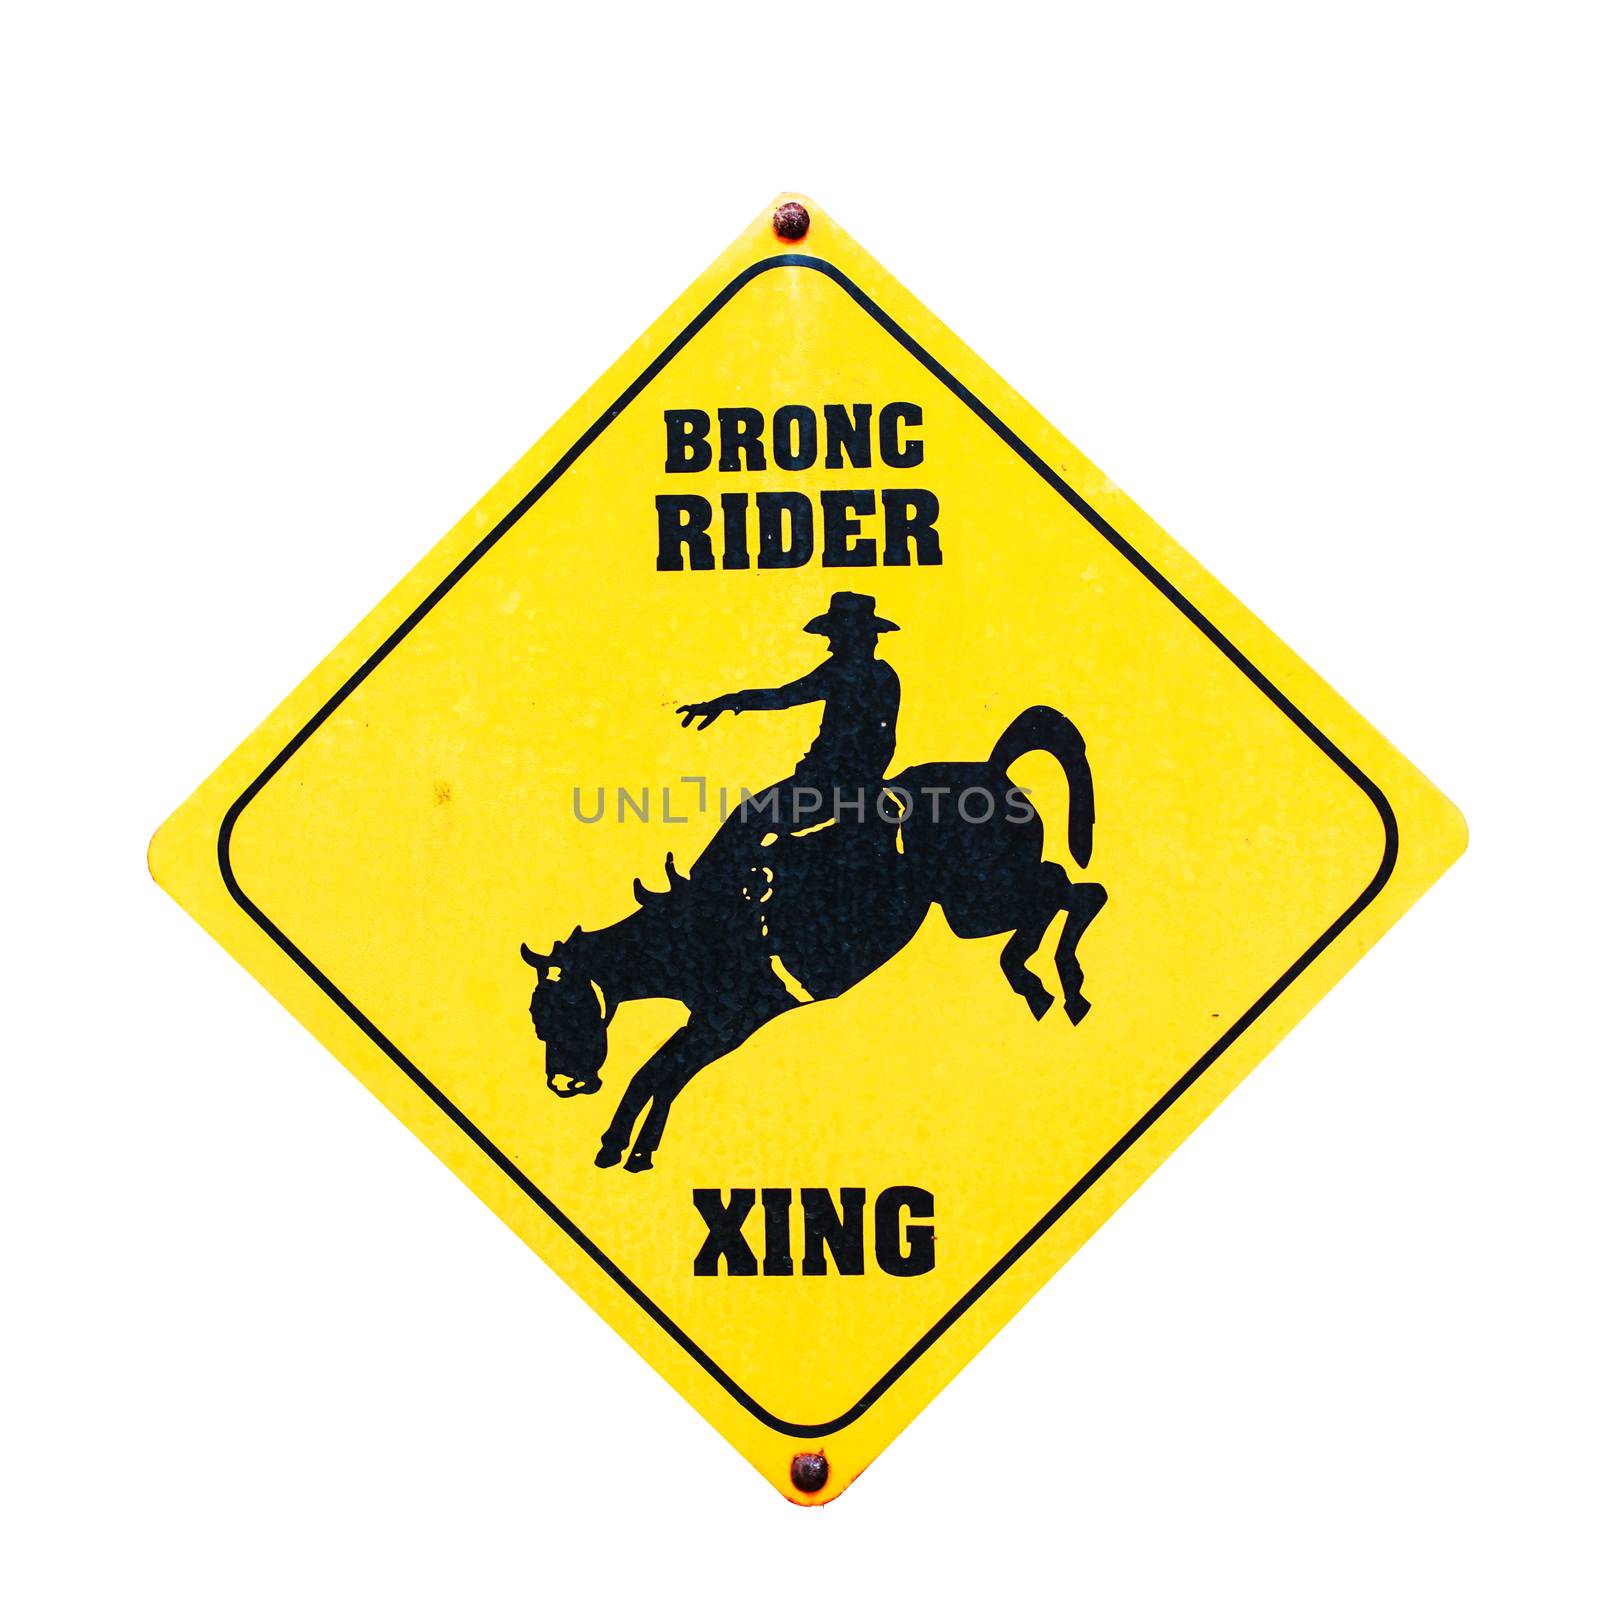 Bronc rider sign with clipping path by nopparats